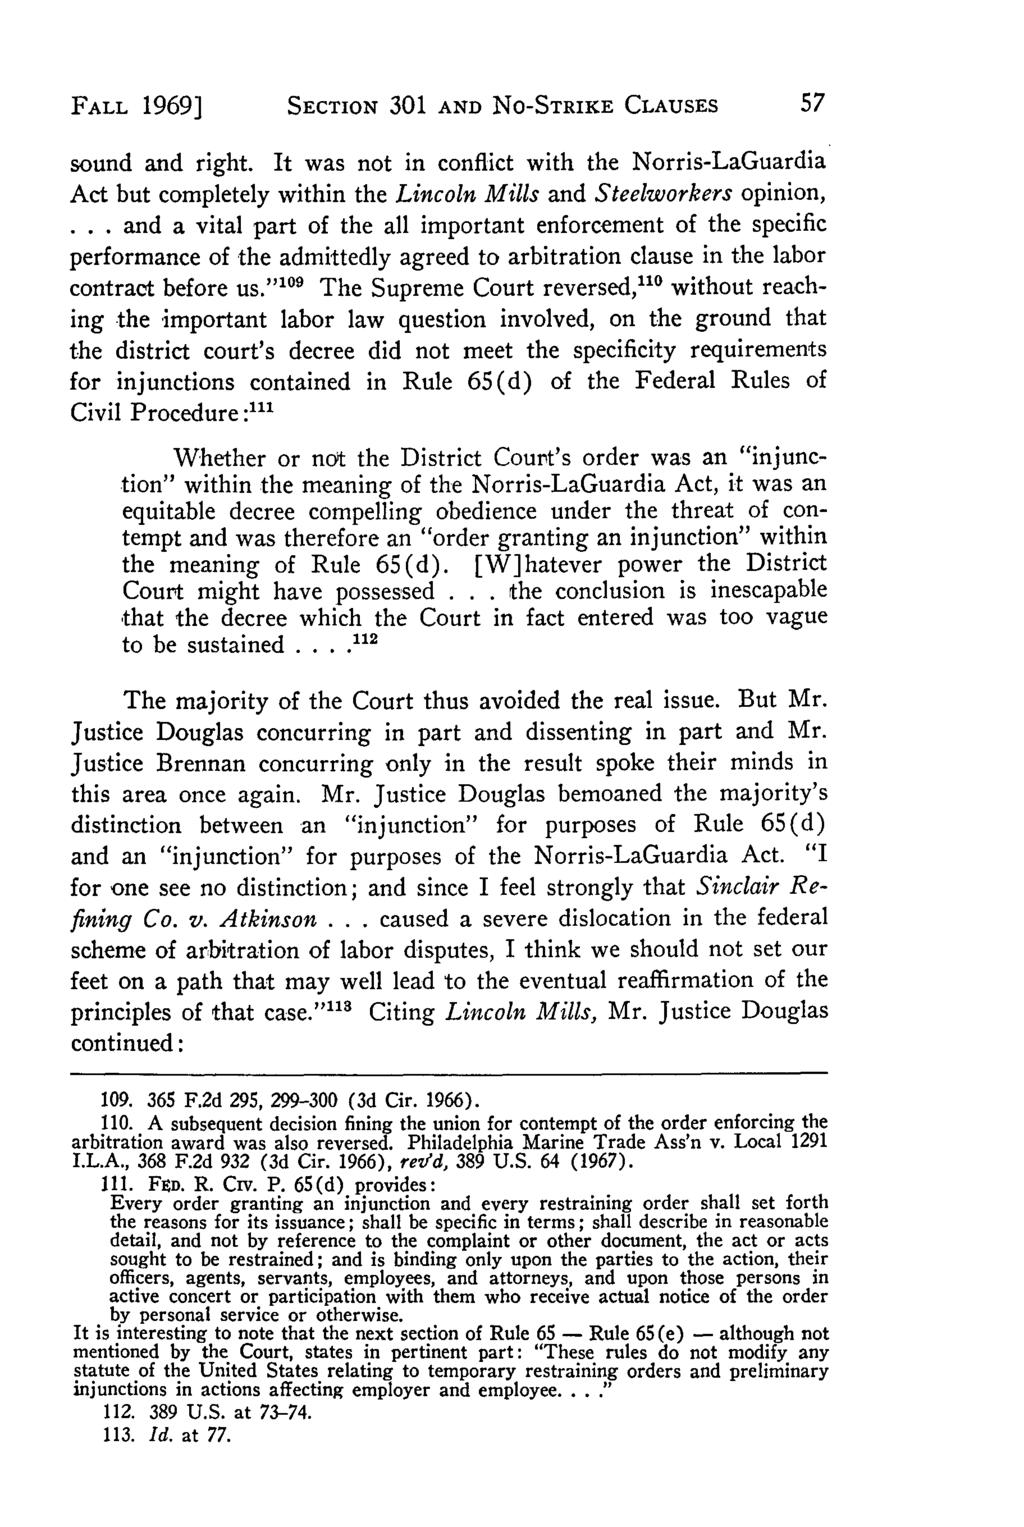 Villanova Law Review, Vol. 15, Iss. 1 [1969], Art. 2 FALL 1969] SECTION 301 AND No-STRIKE CLAUSES sound and right.